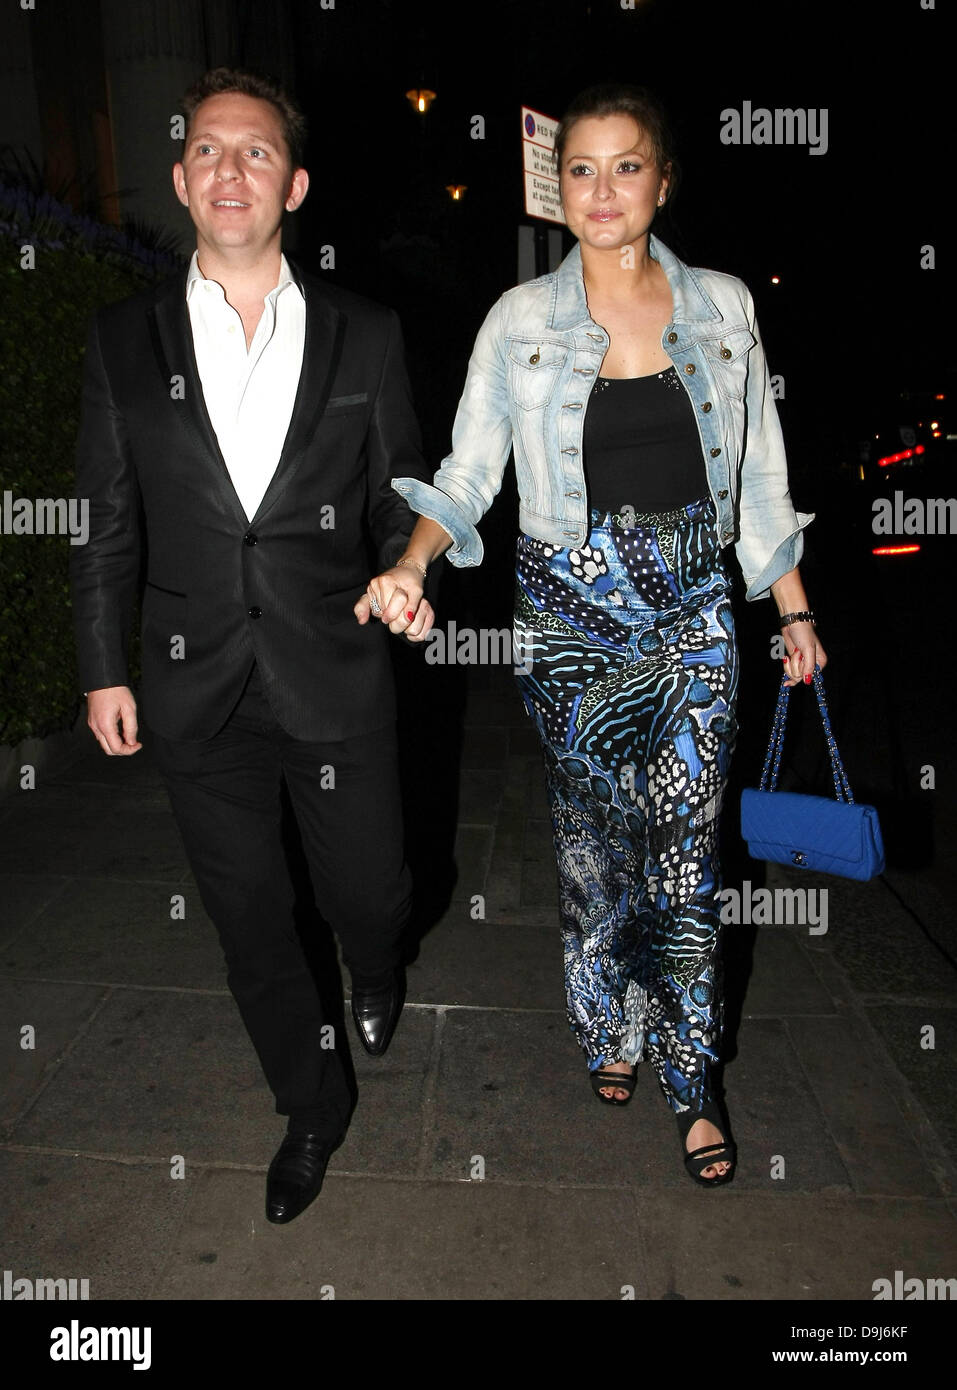 Holly Valance and Nick Candy  leave the Mandarin Oriental hotel after enjoying drinks at it's bar  London, England - 01.04.11 Stock Photo